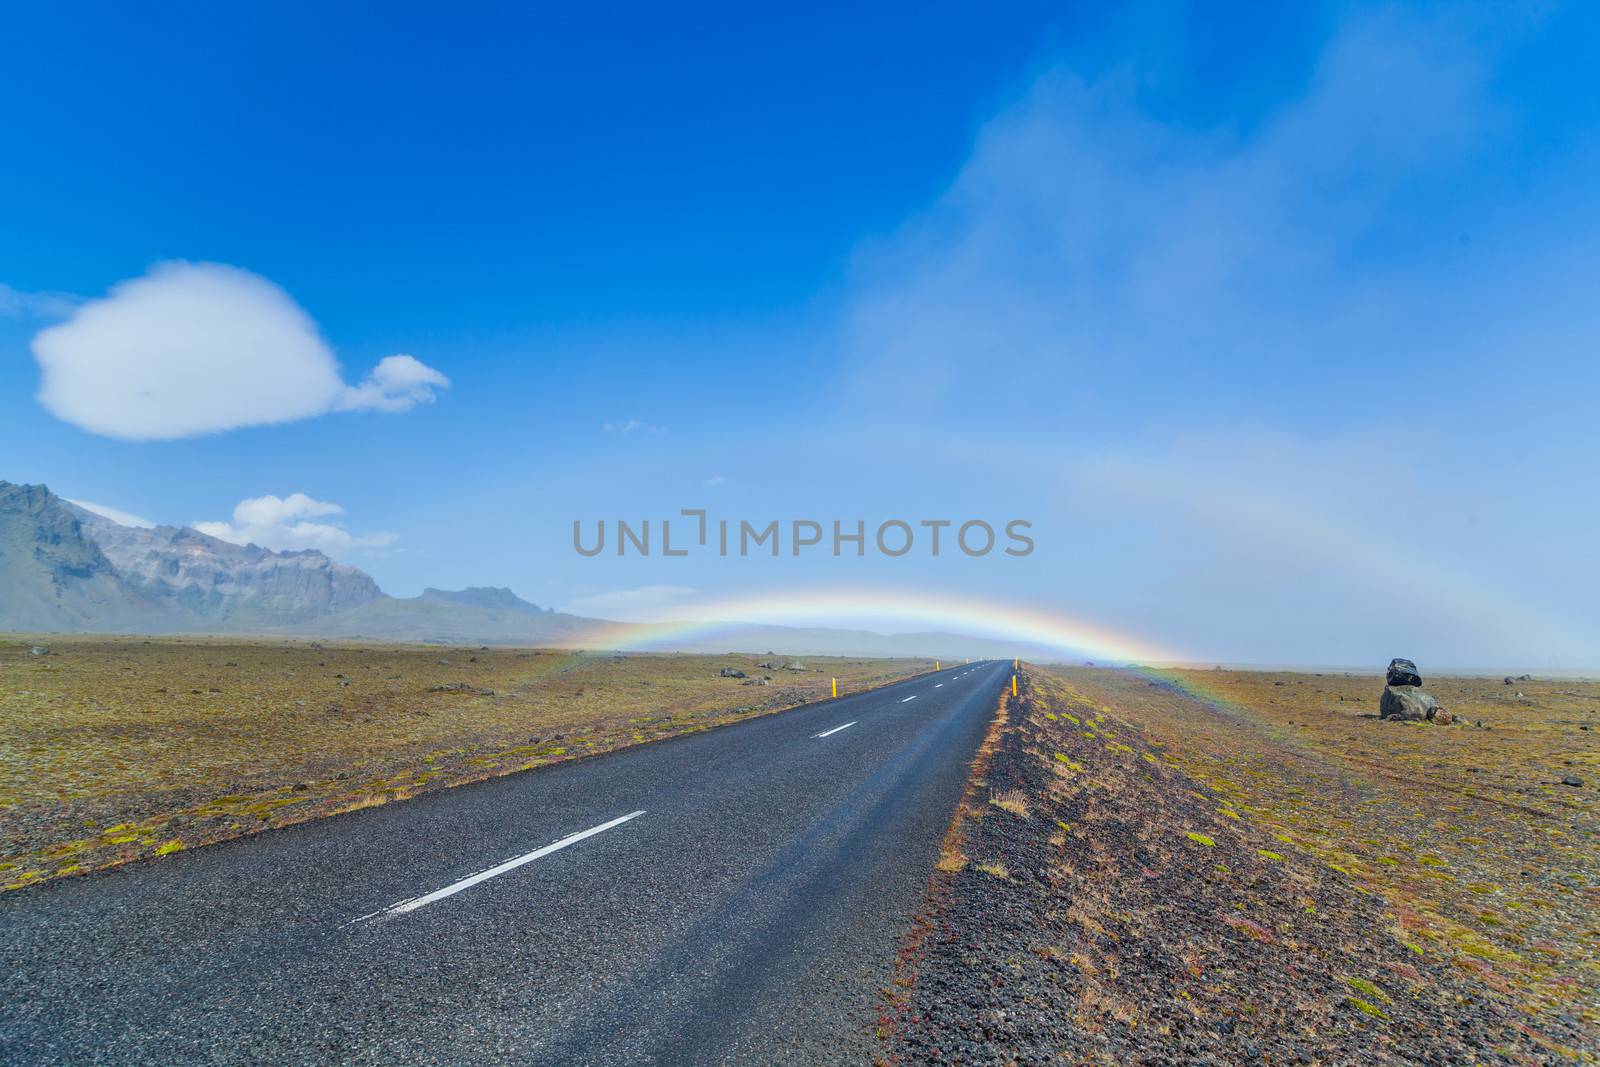 South Icelandic road landscape under a blue bright sky with double rainbow